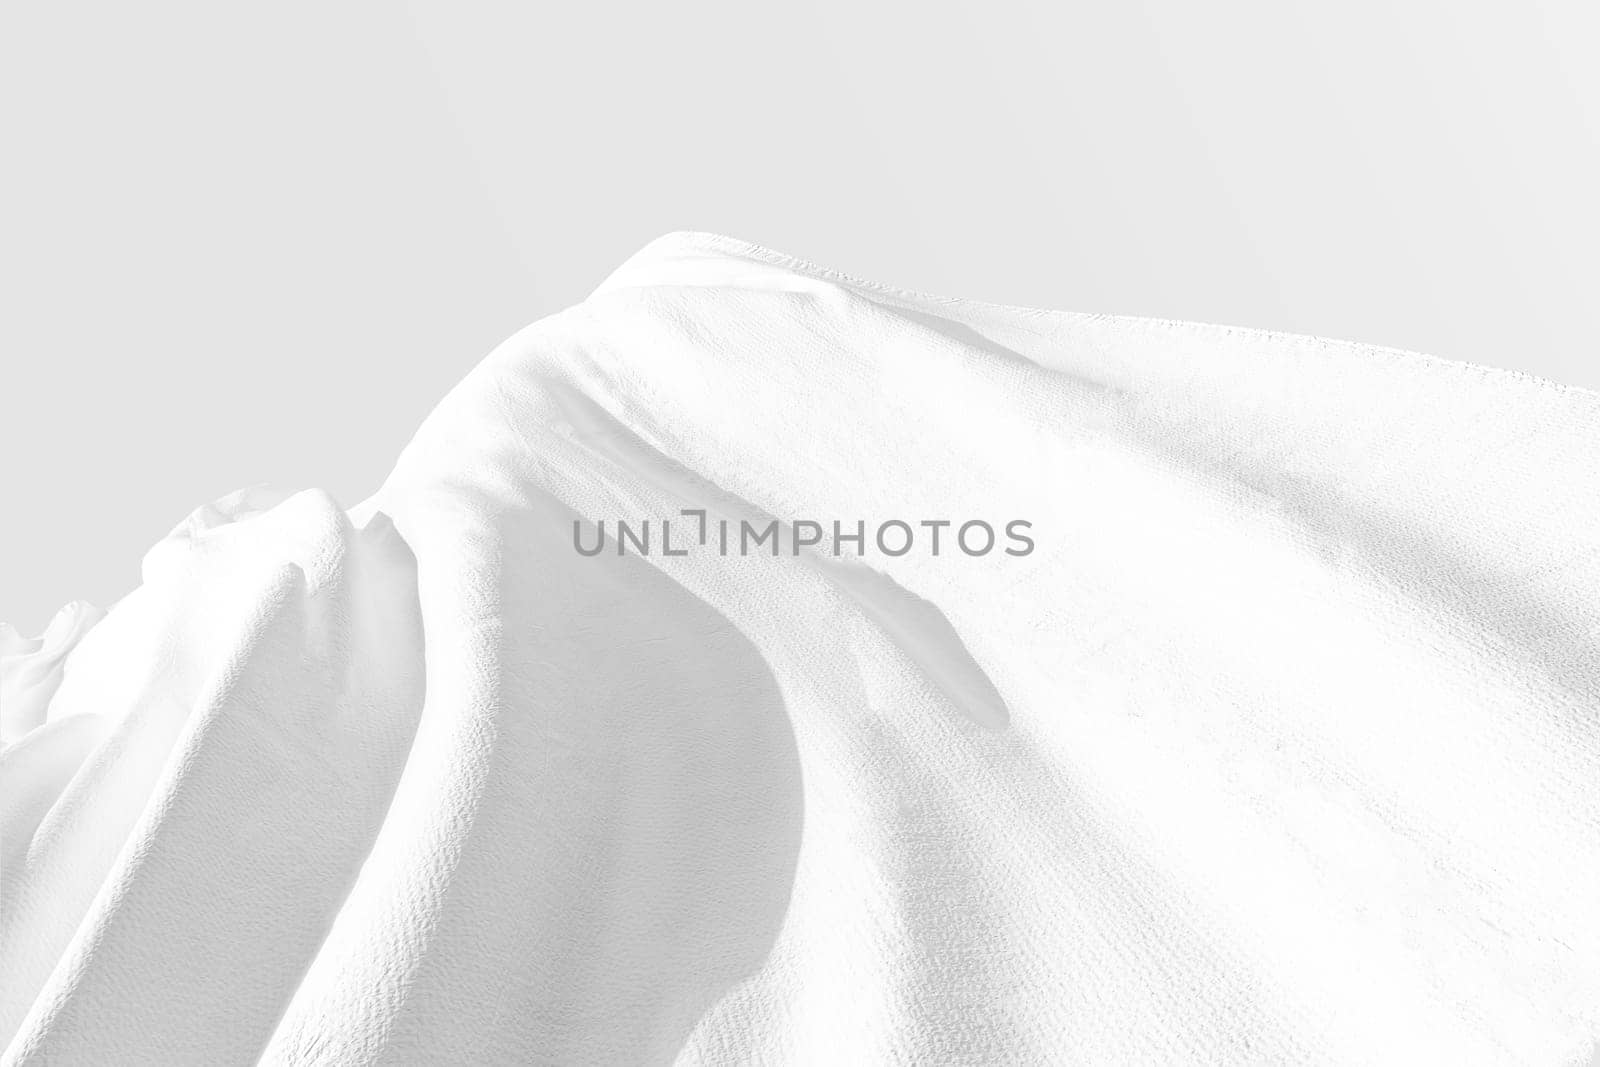 Background texture of crumpled white fabric on a light background with space for text